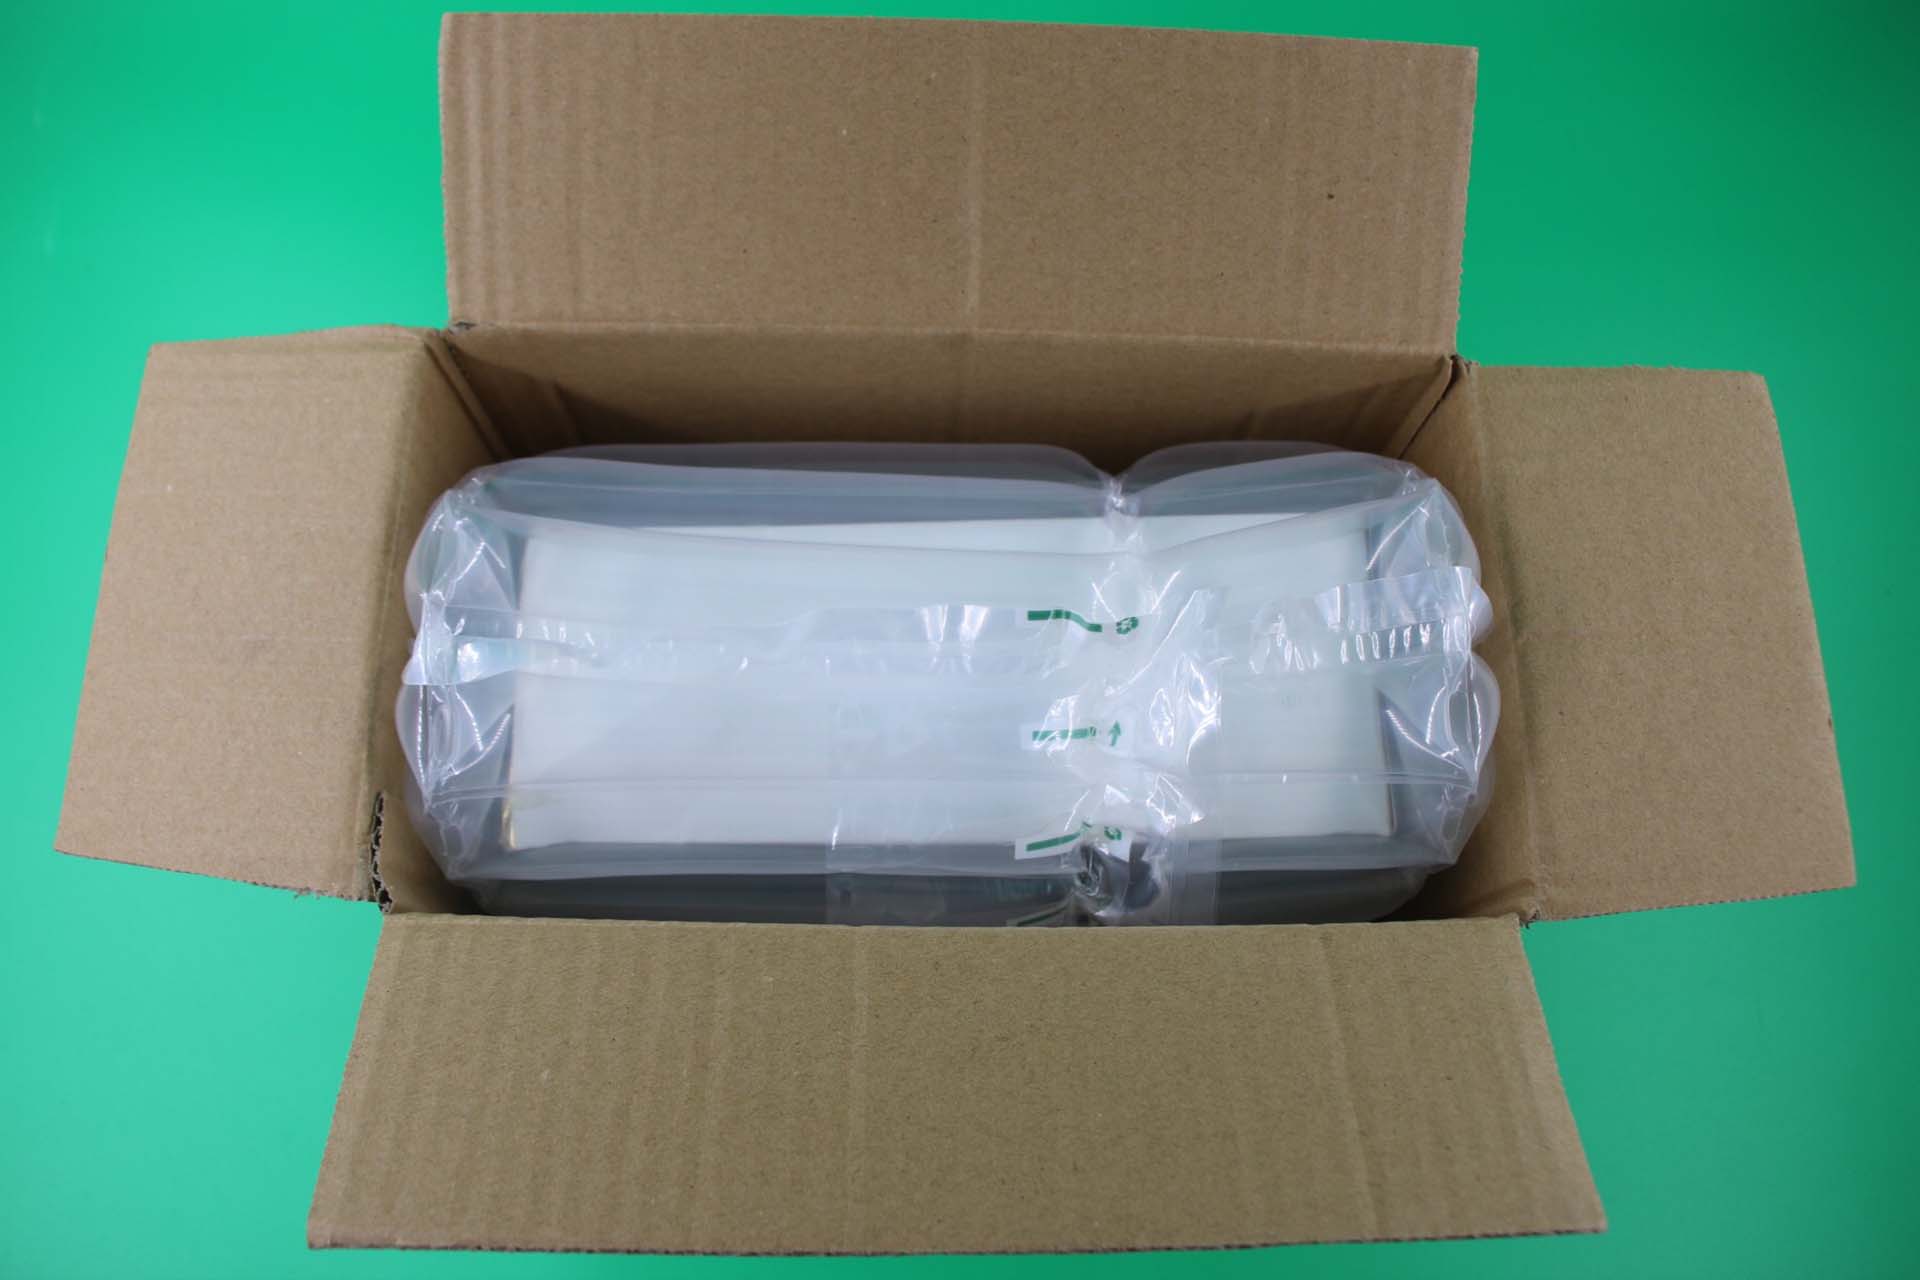 Sunshinepack Custom rice packaging bags manufacturers Supply for package